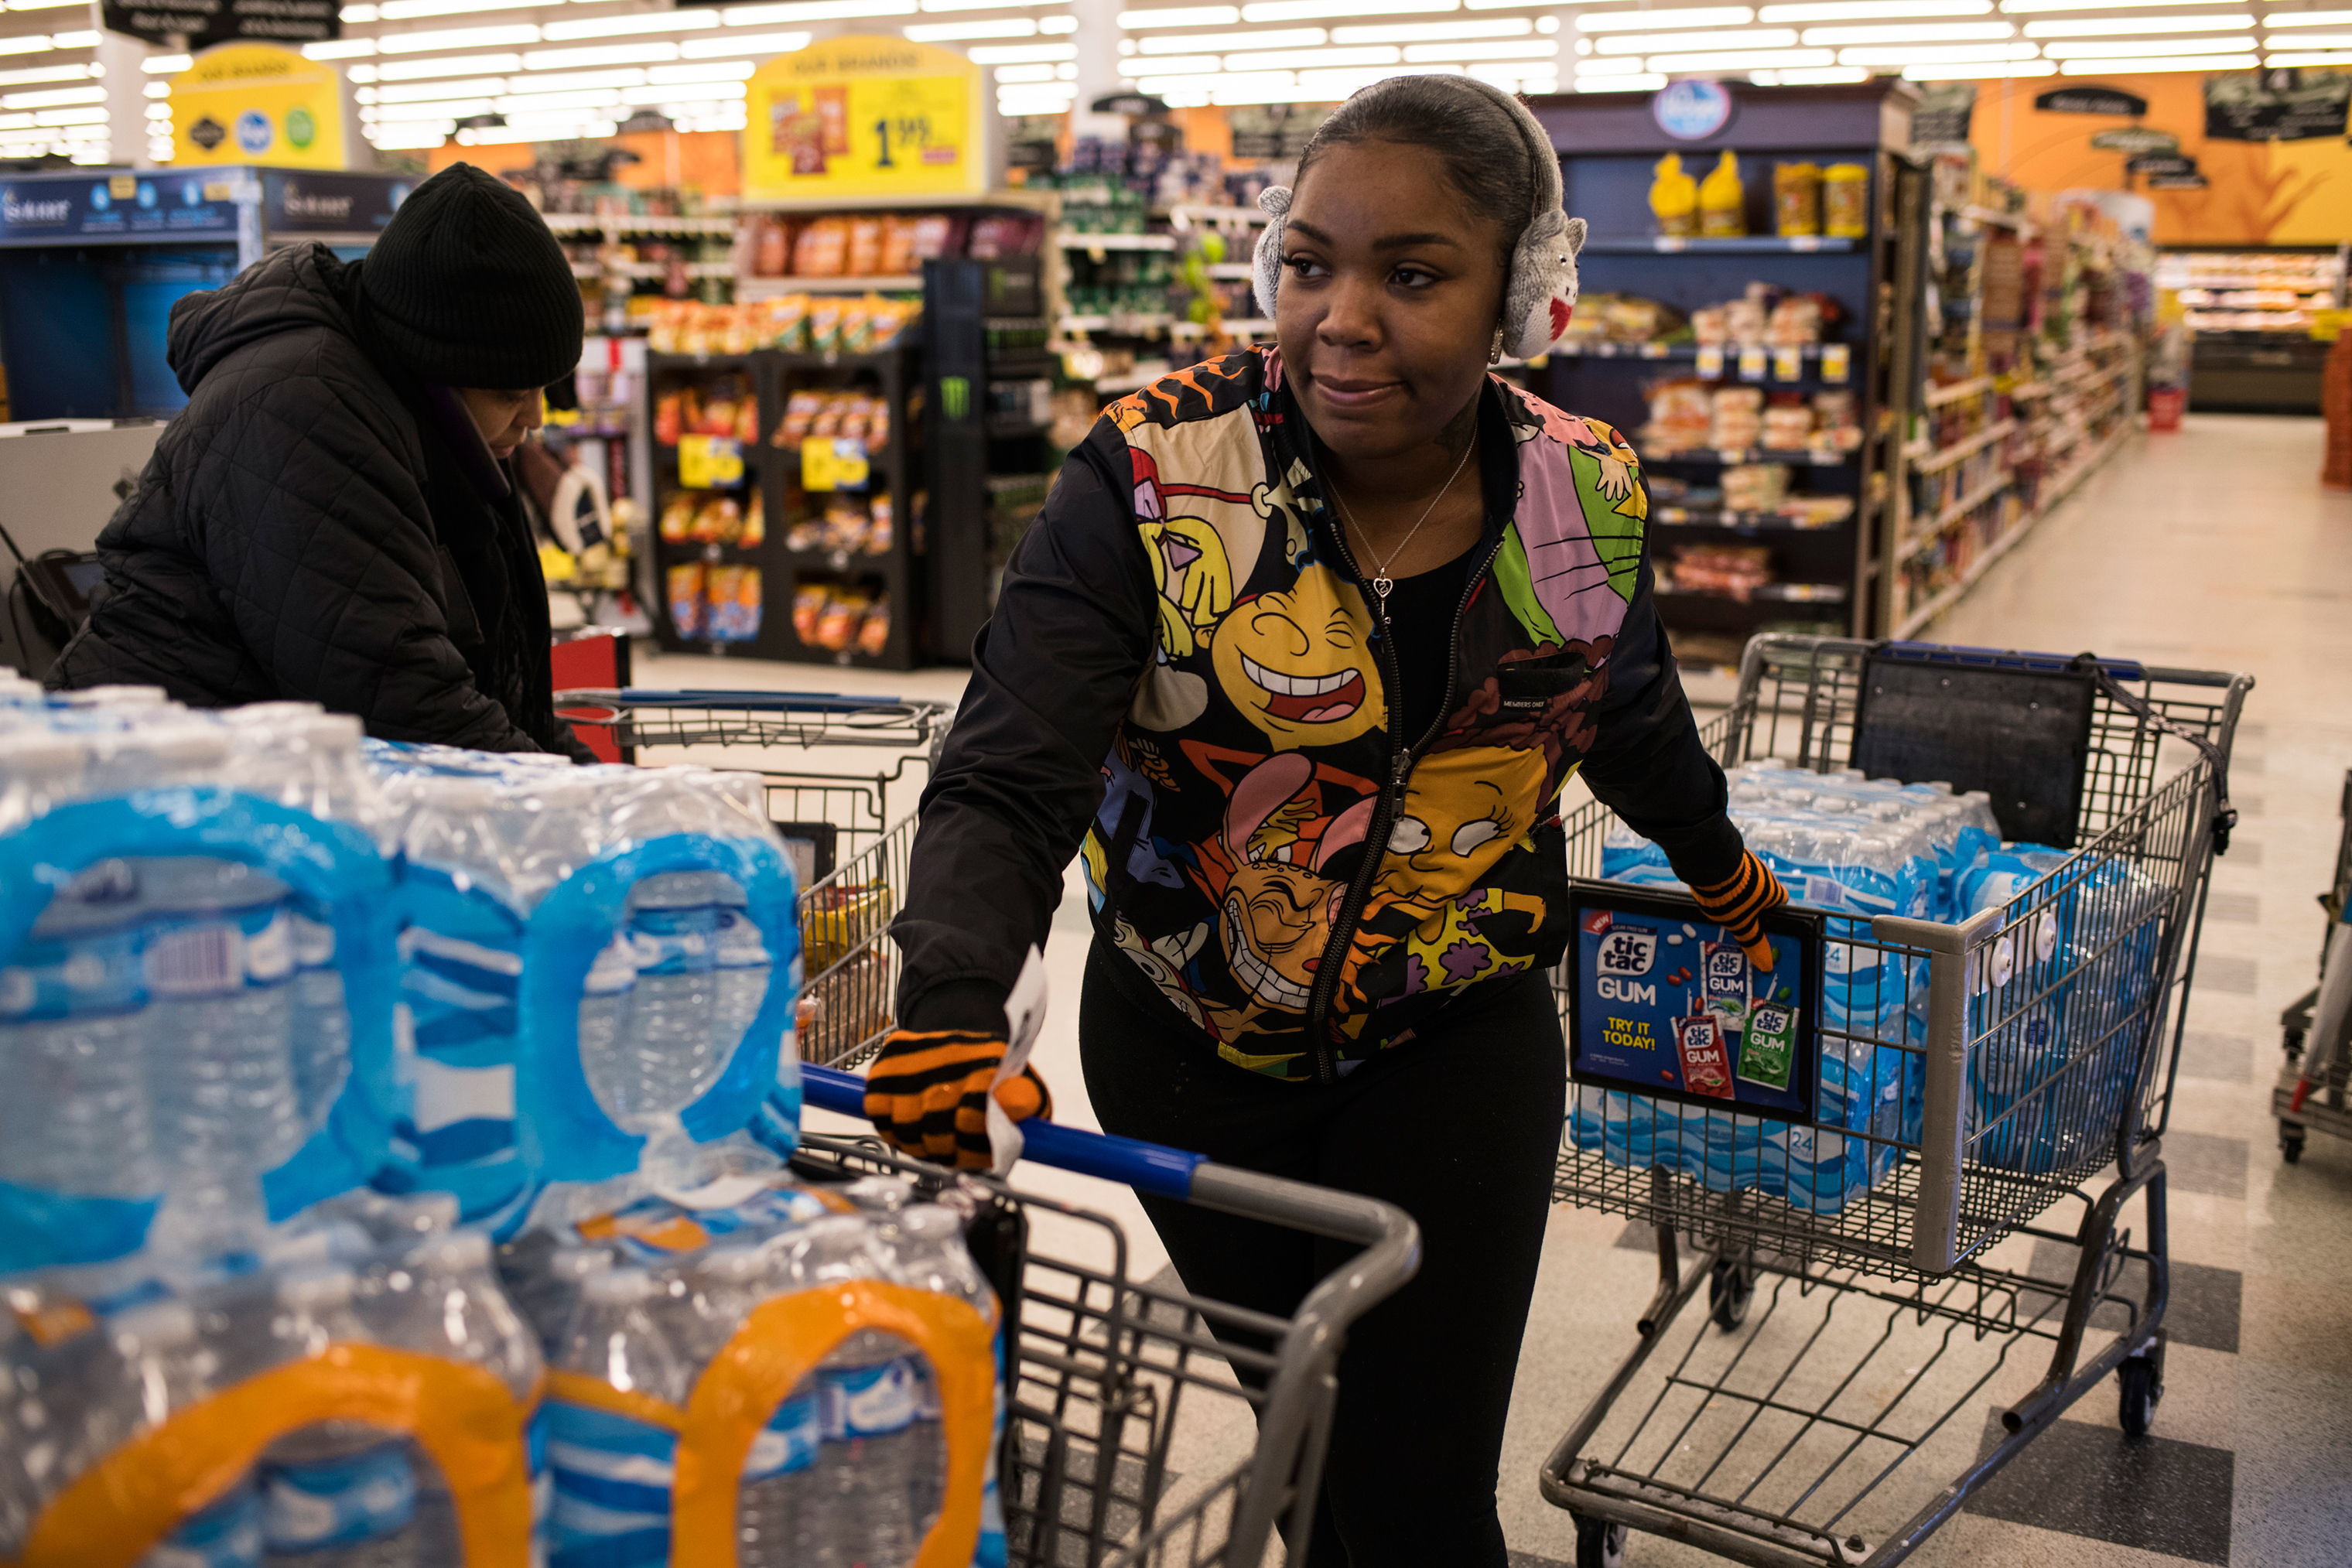 Flint residents ask Hawk for help getting safe water; she’s seen here in January buying cases to distribute. (Brittany Greeson for TIME)